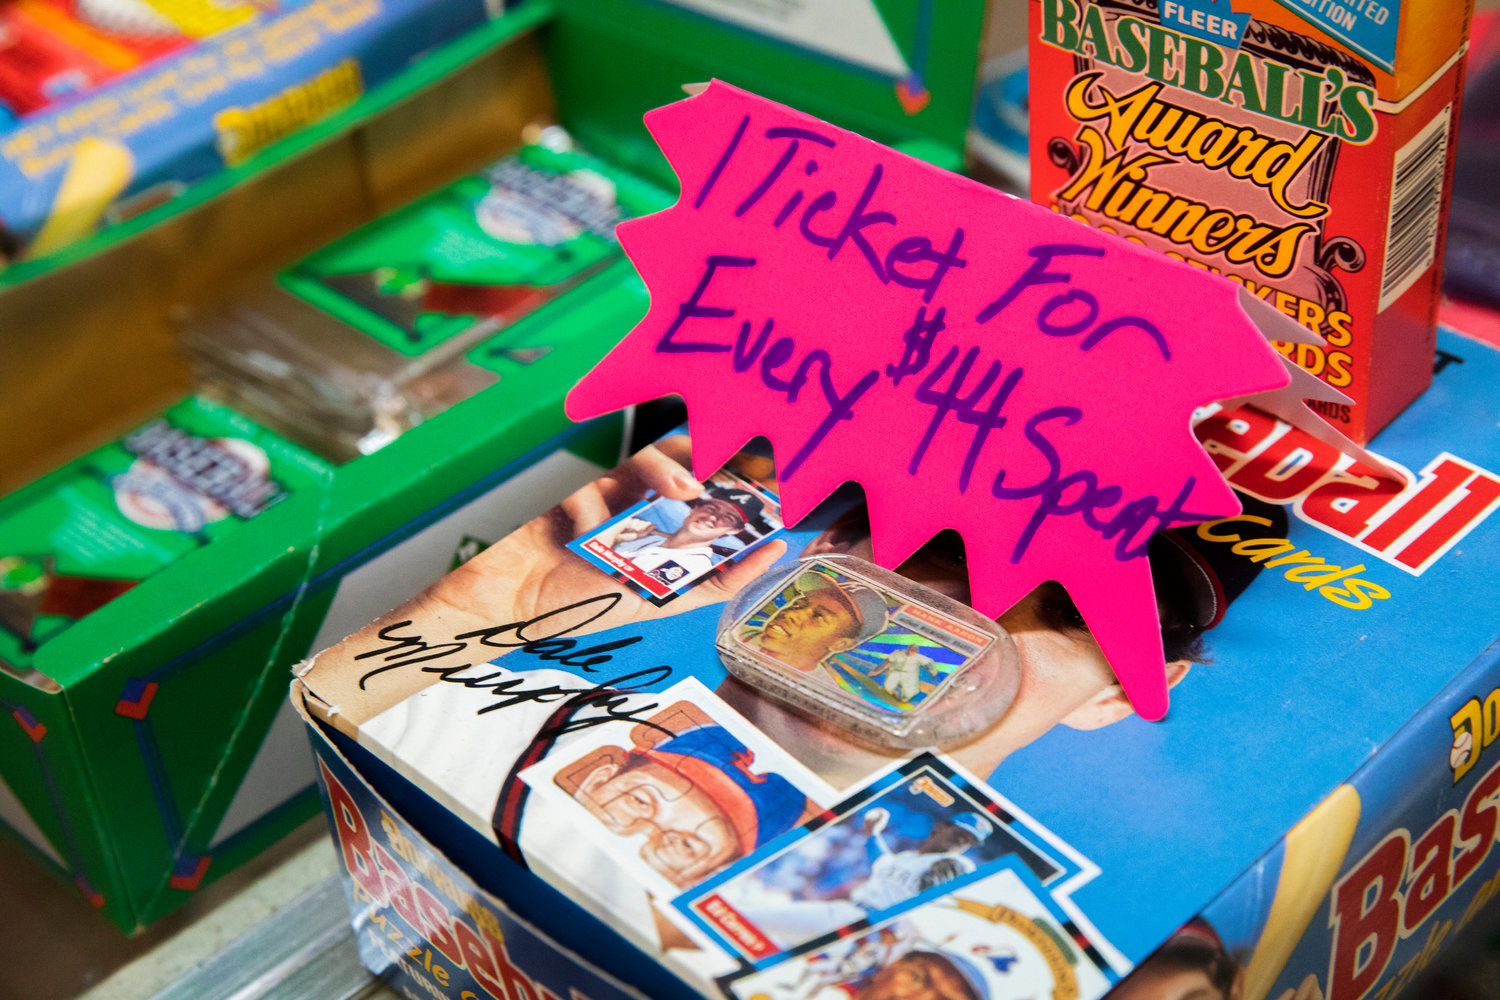 Specials are offered at Keiper’s Cards in downtown Centralia on Thursday.